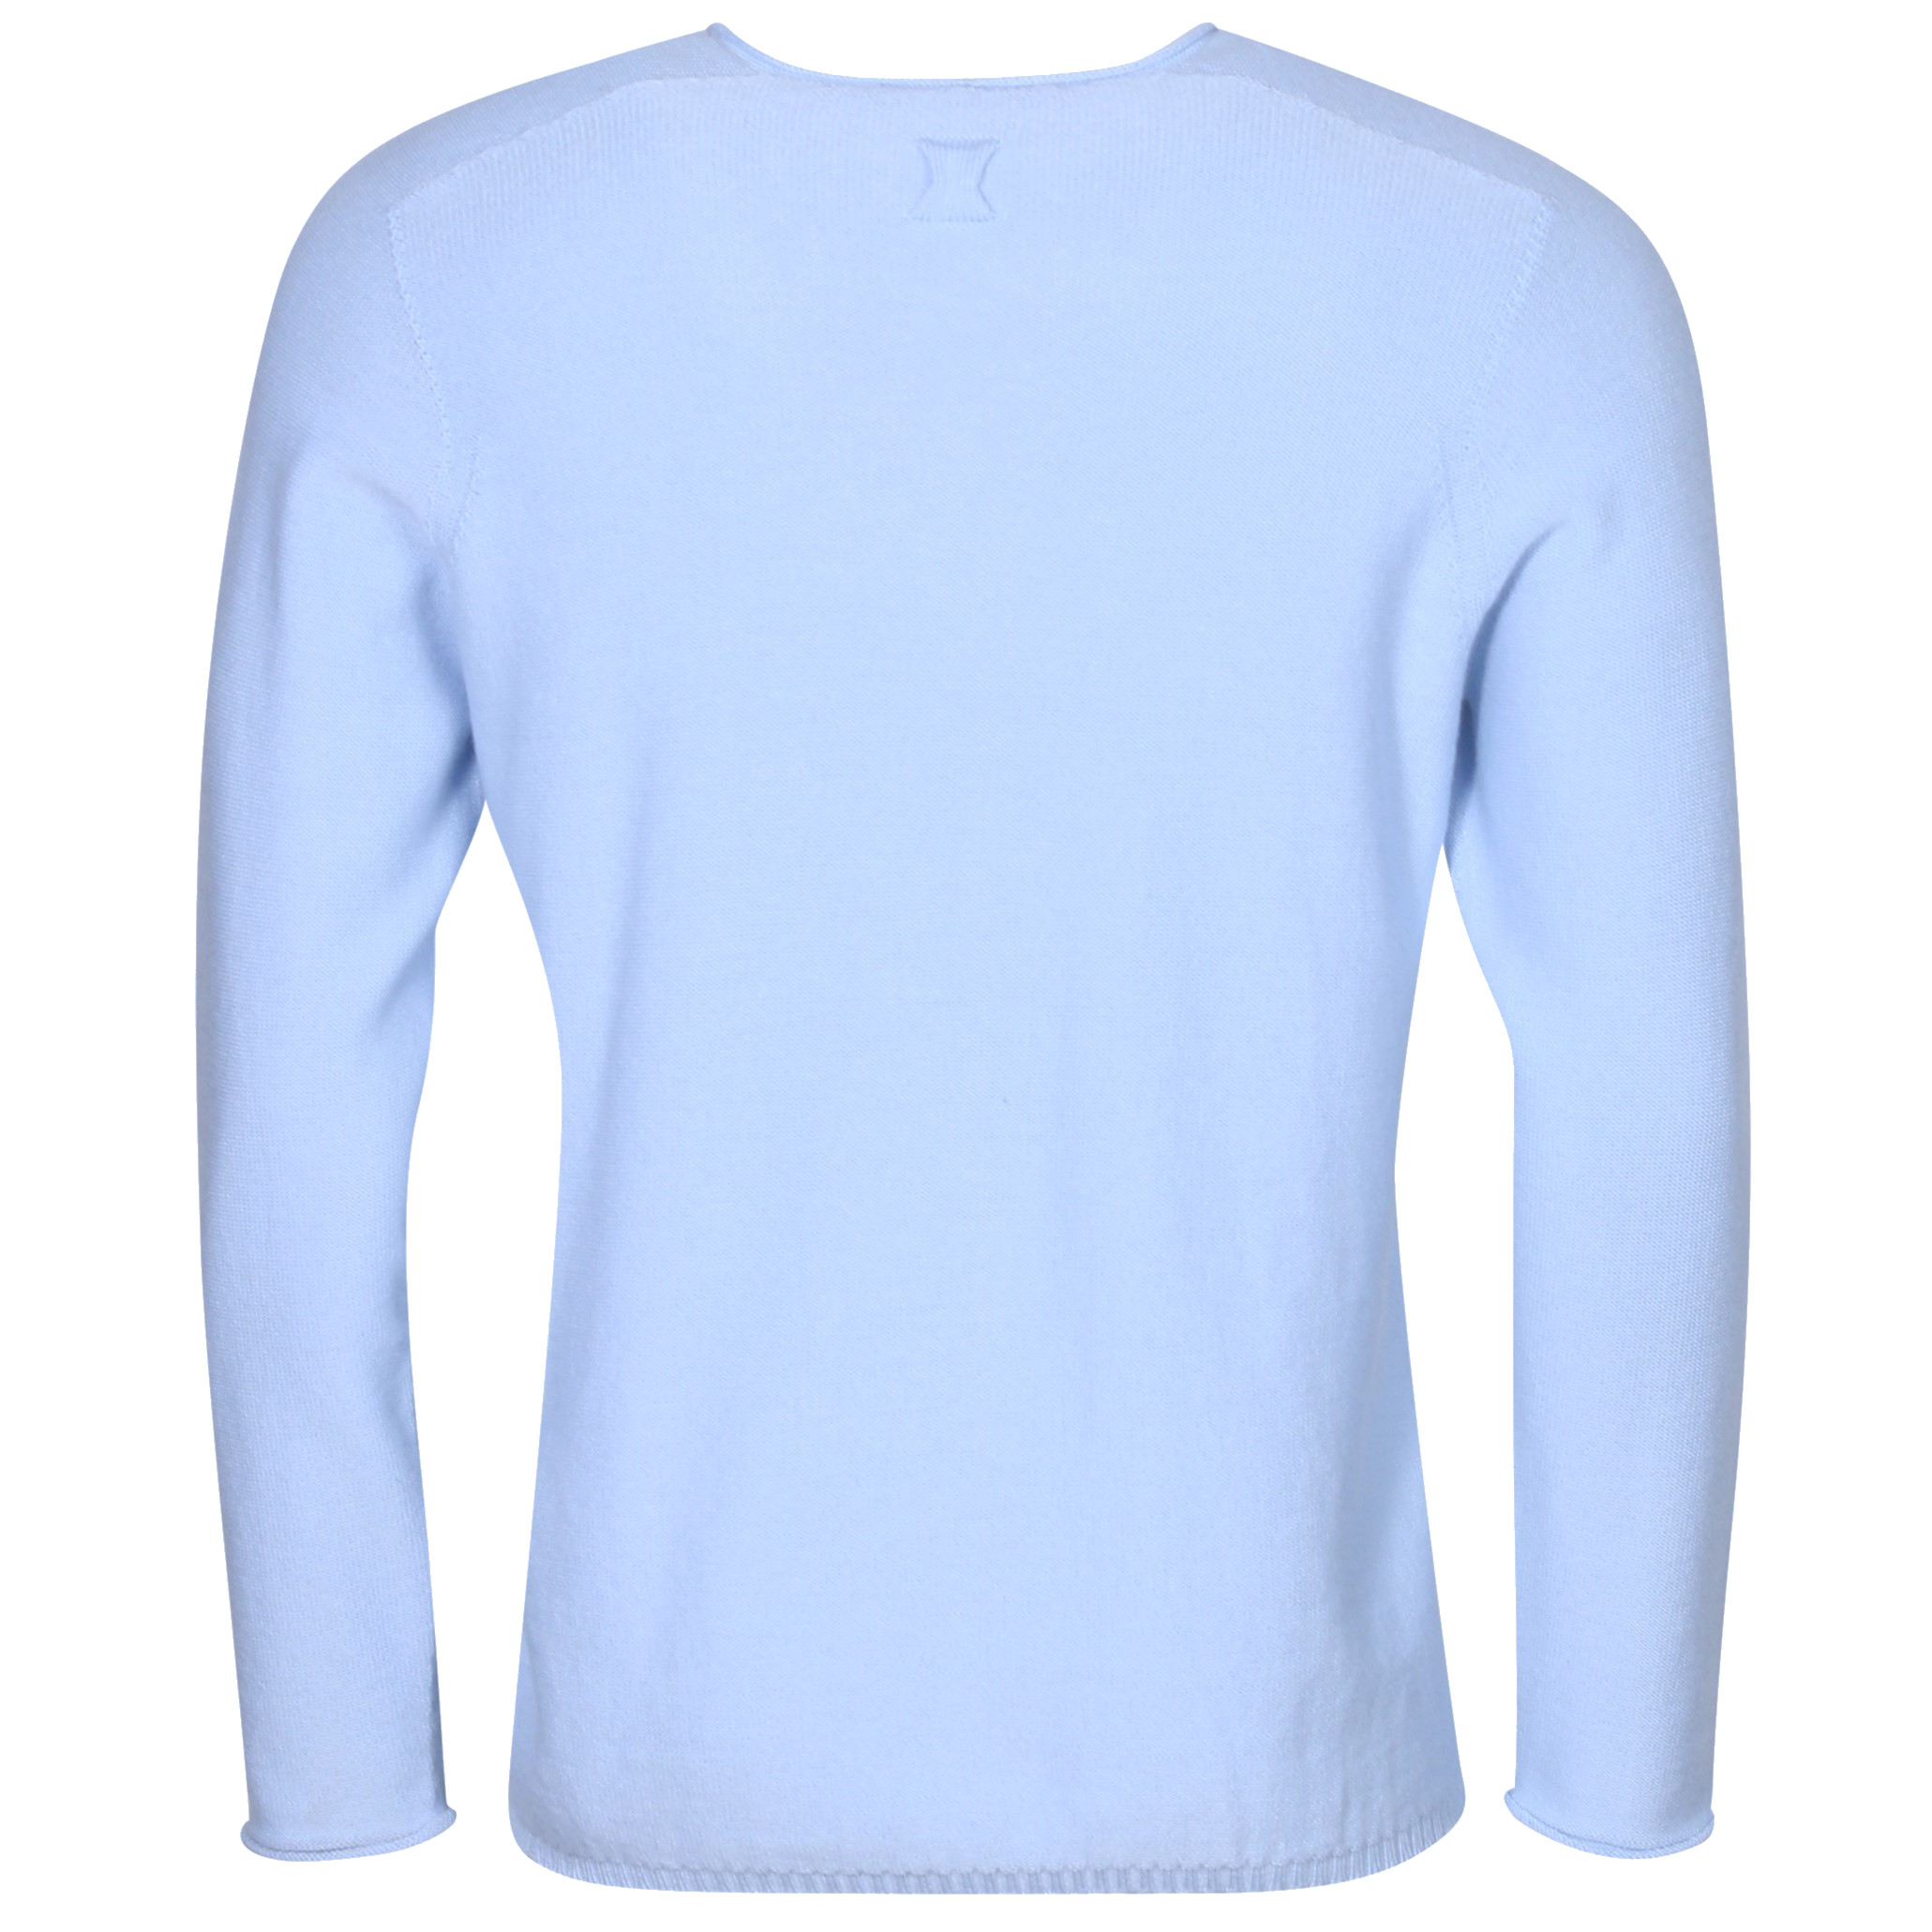 HANNES ROETHER Merino Knit Pullover in Light Blue S